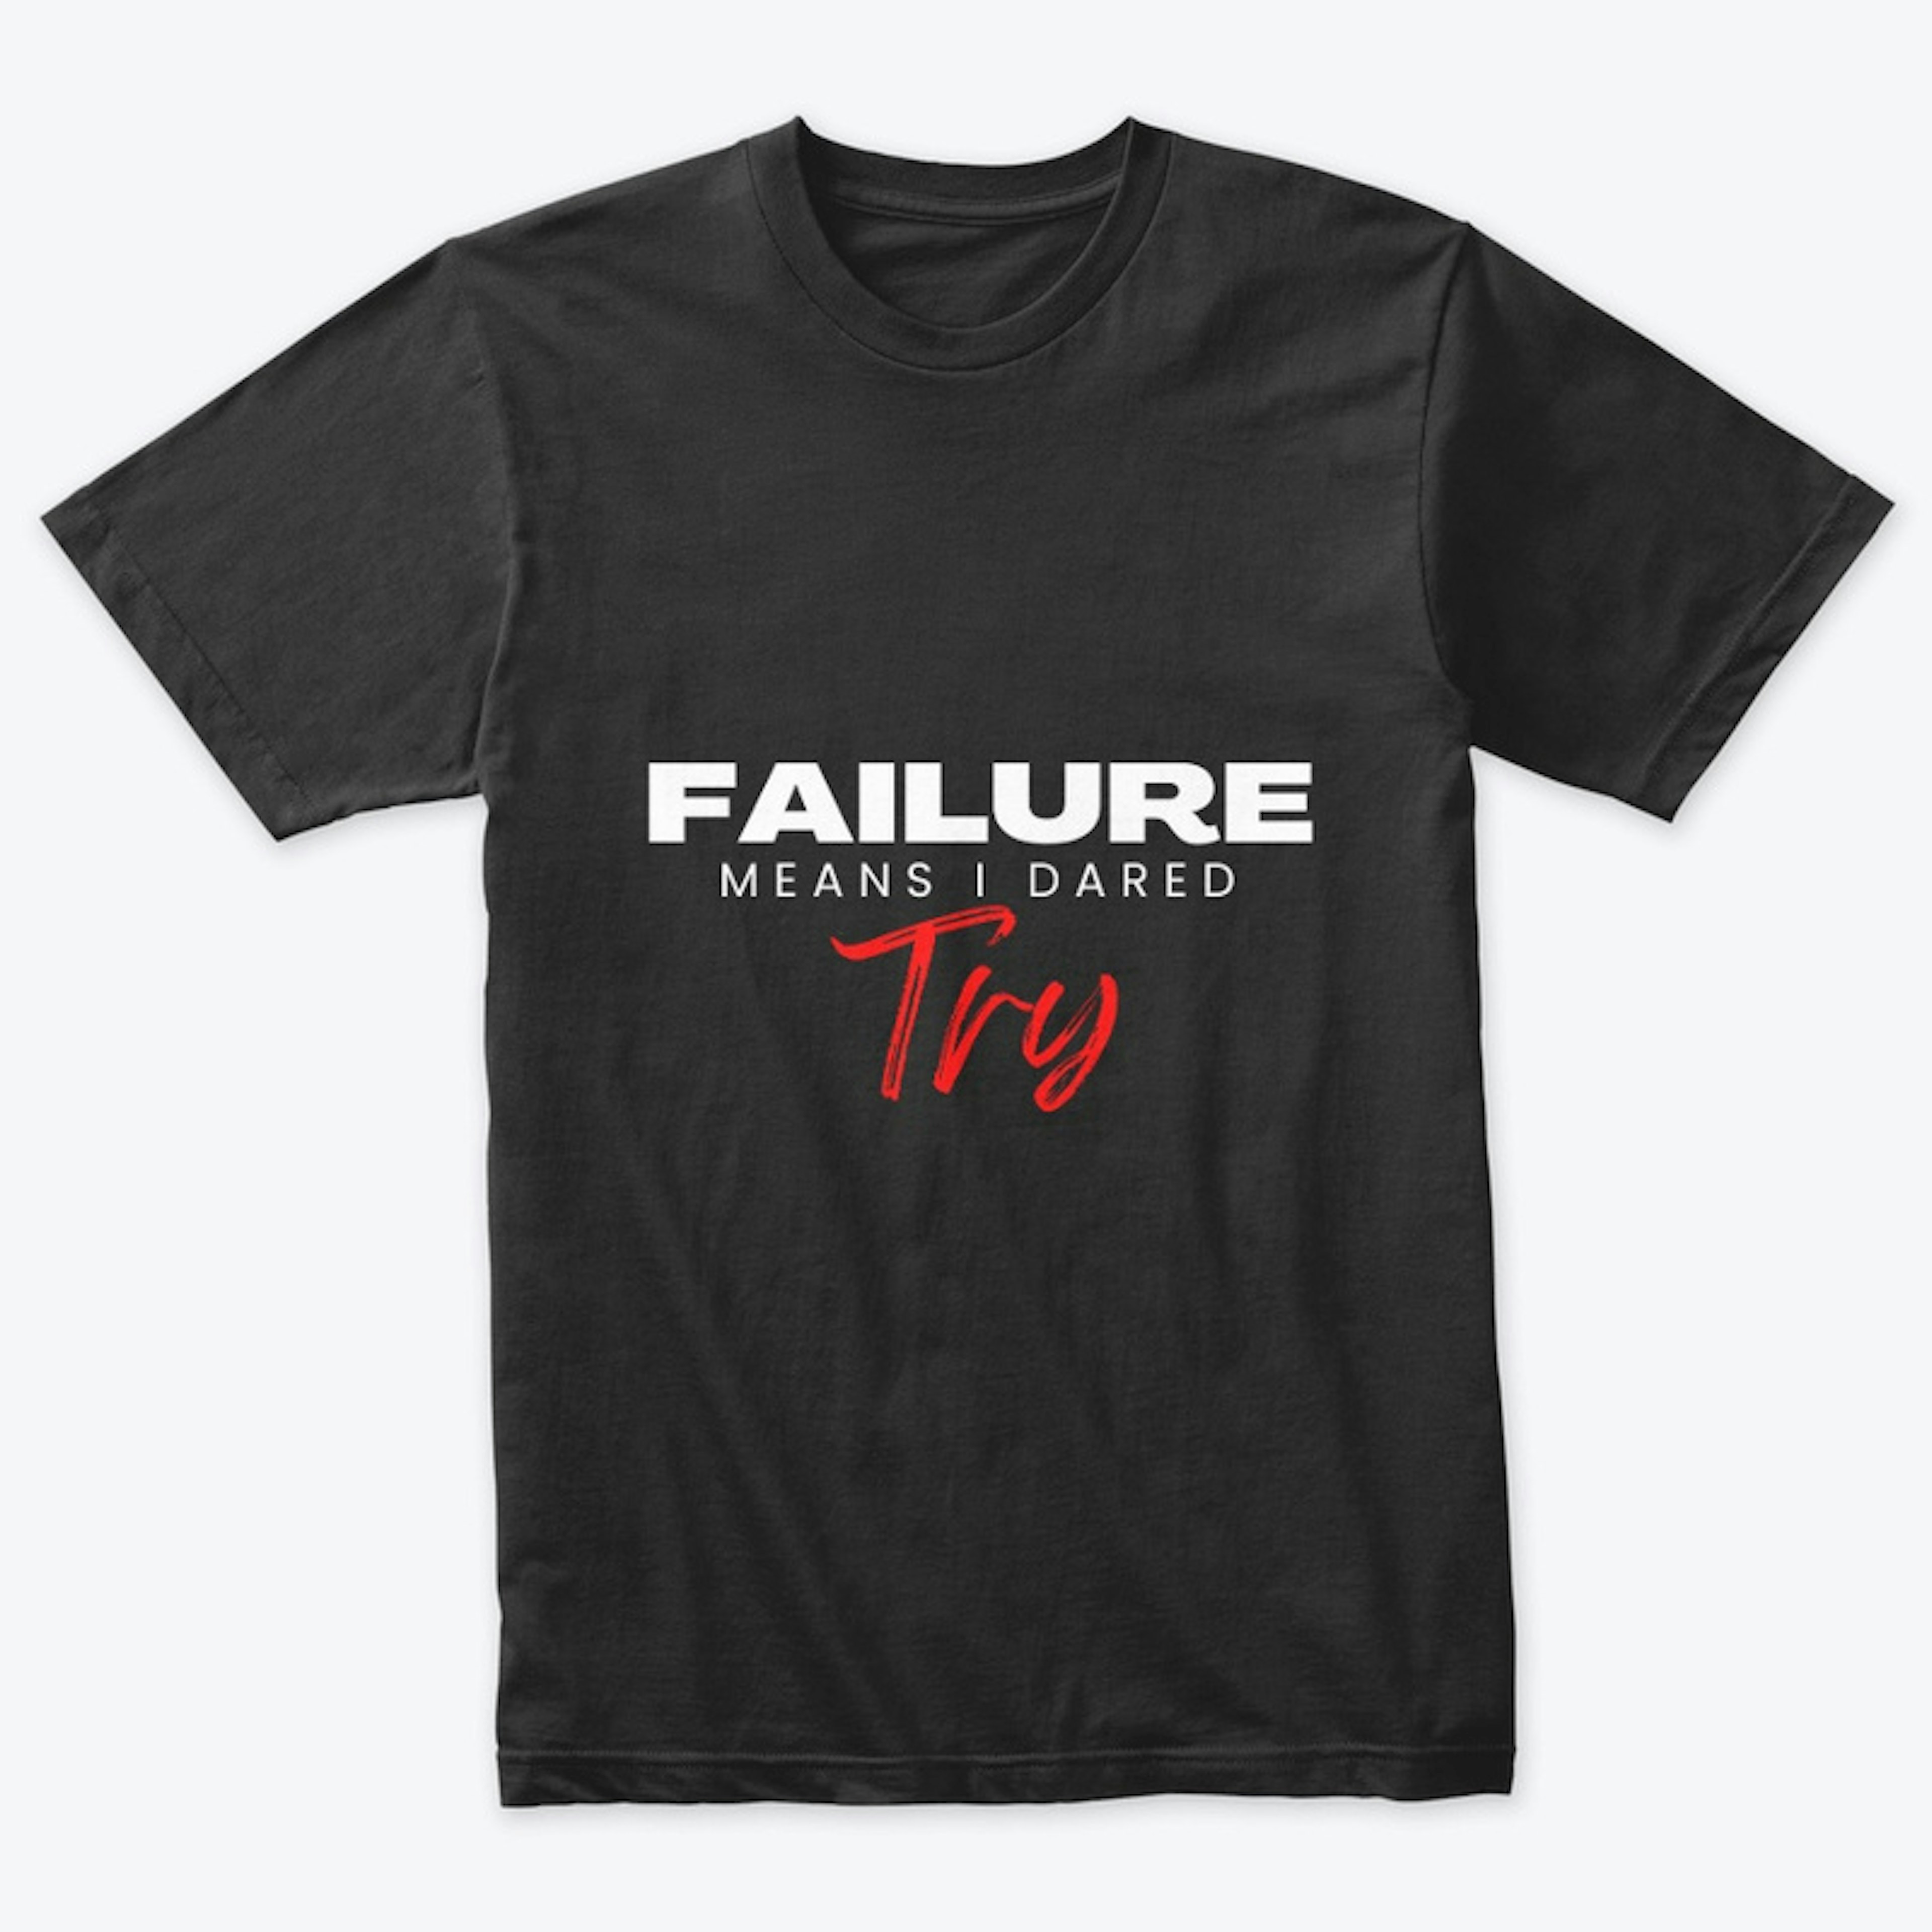 Failure Means I Dared Try